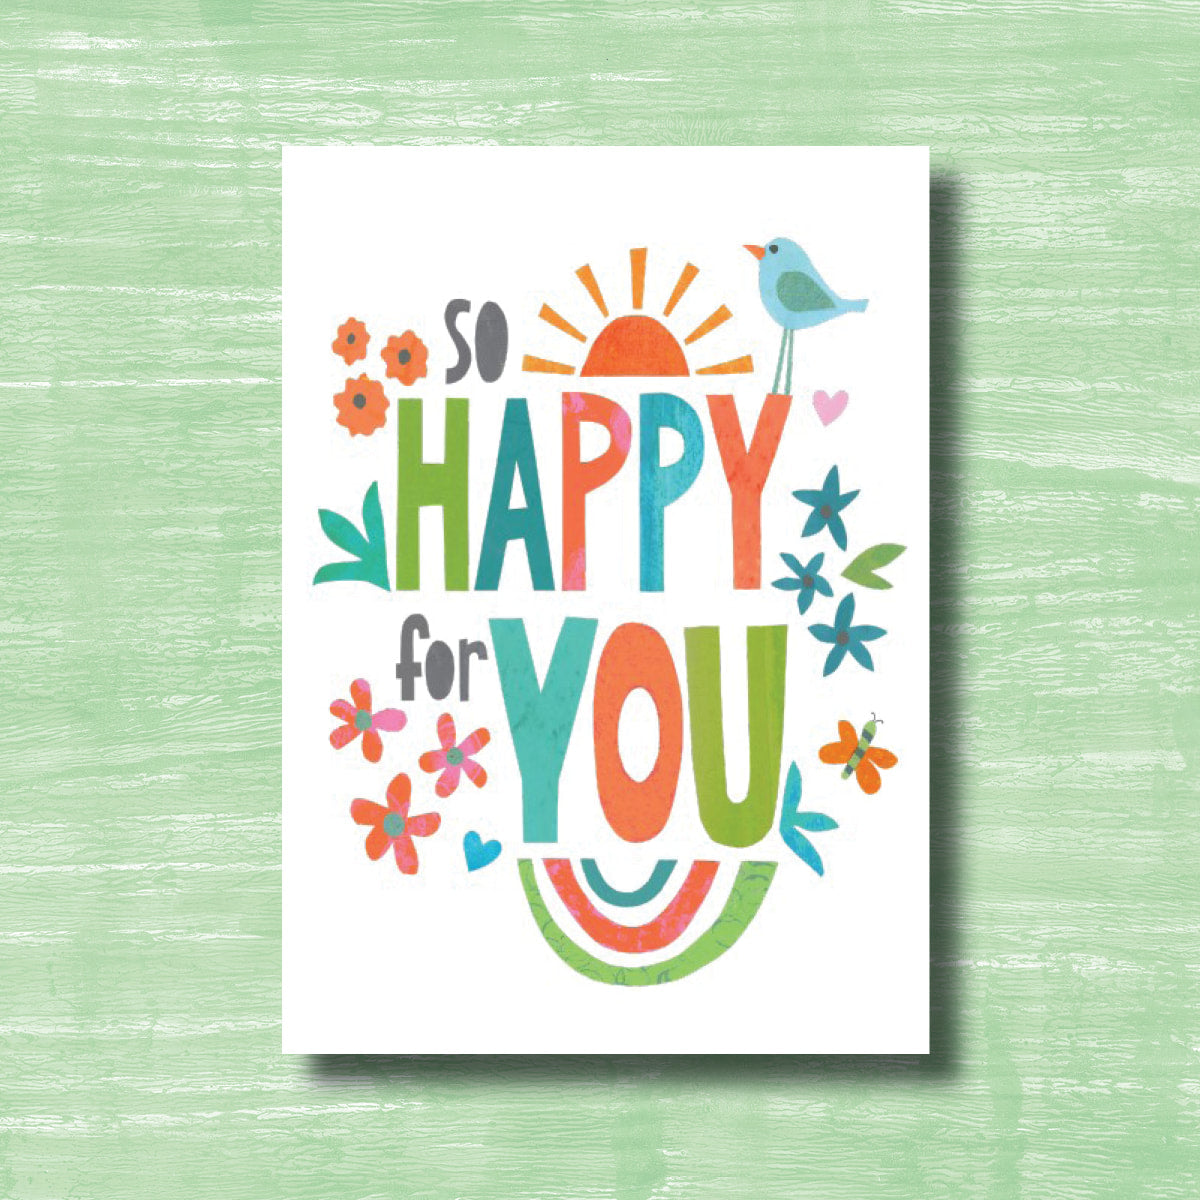 So Happy for You - greeting card